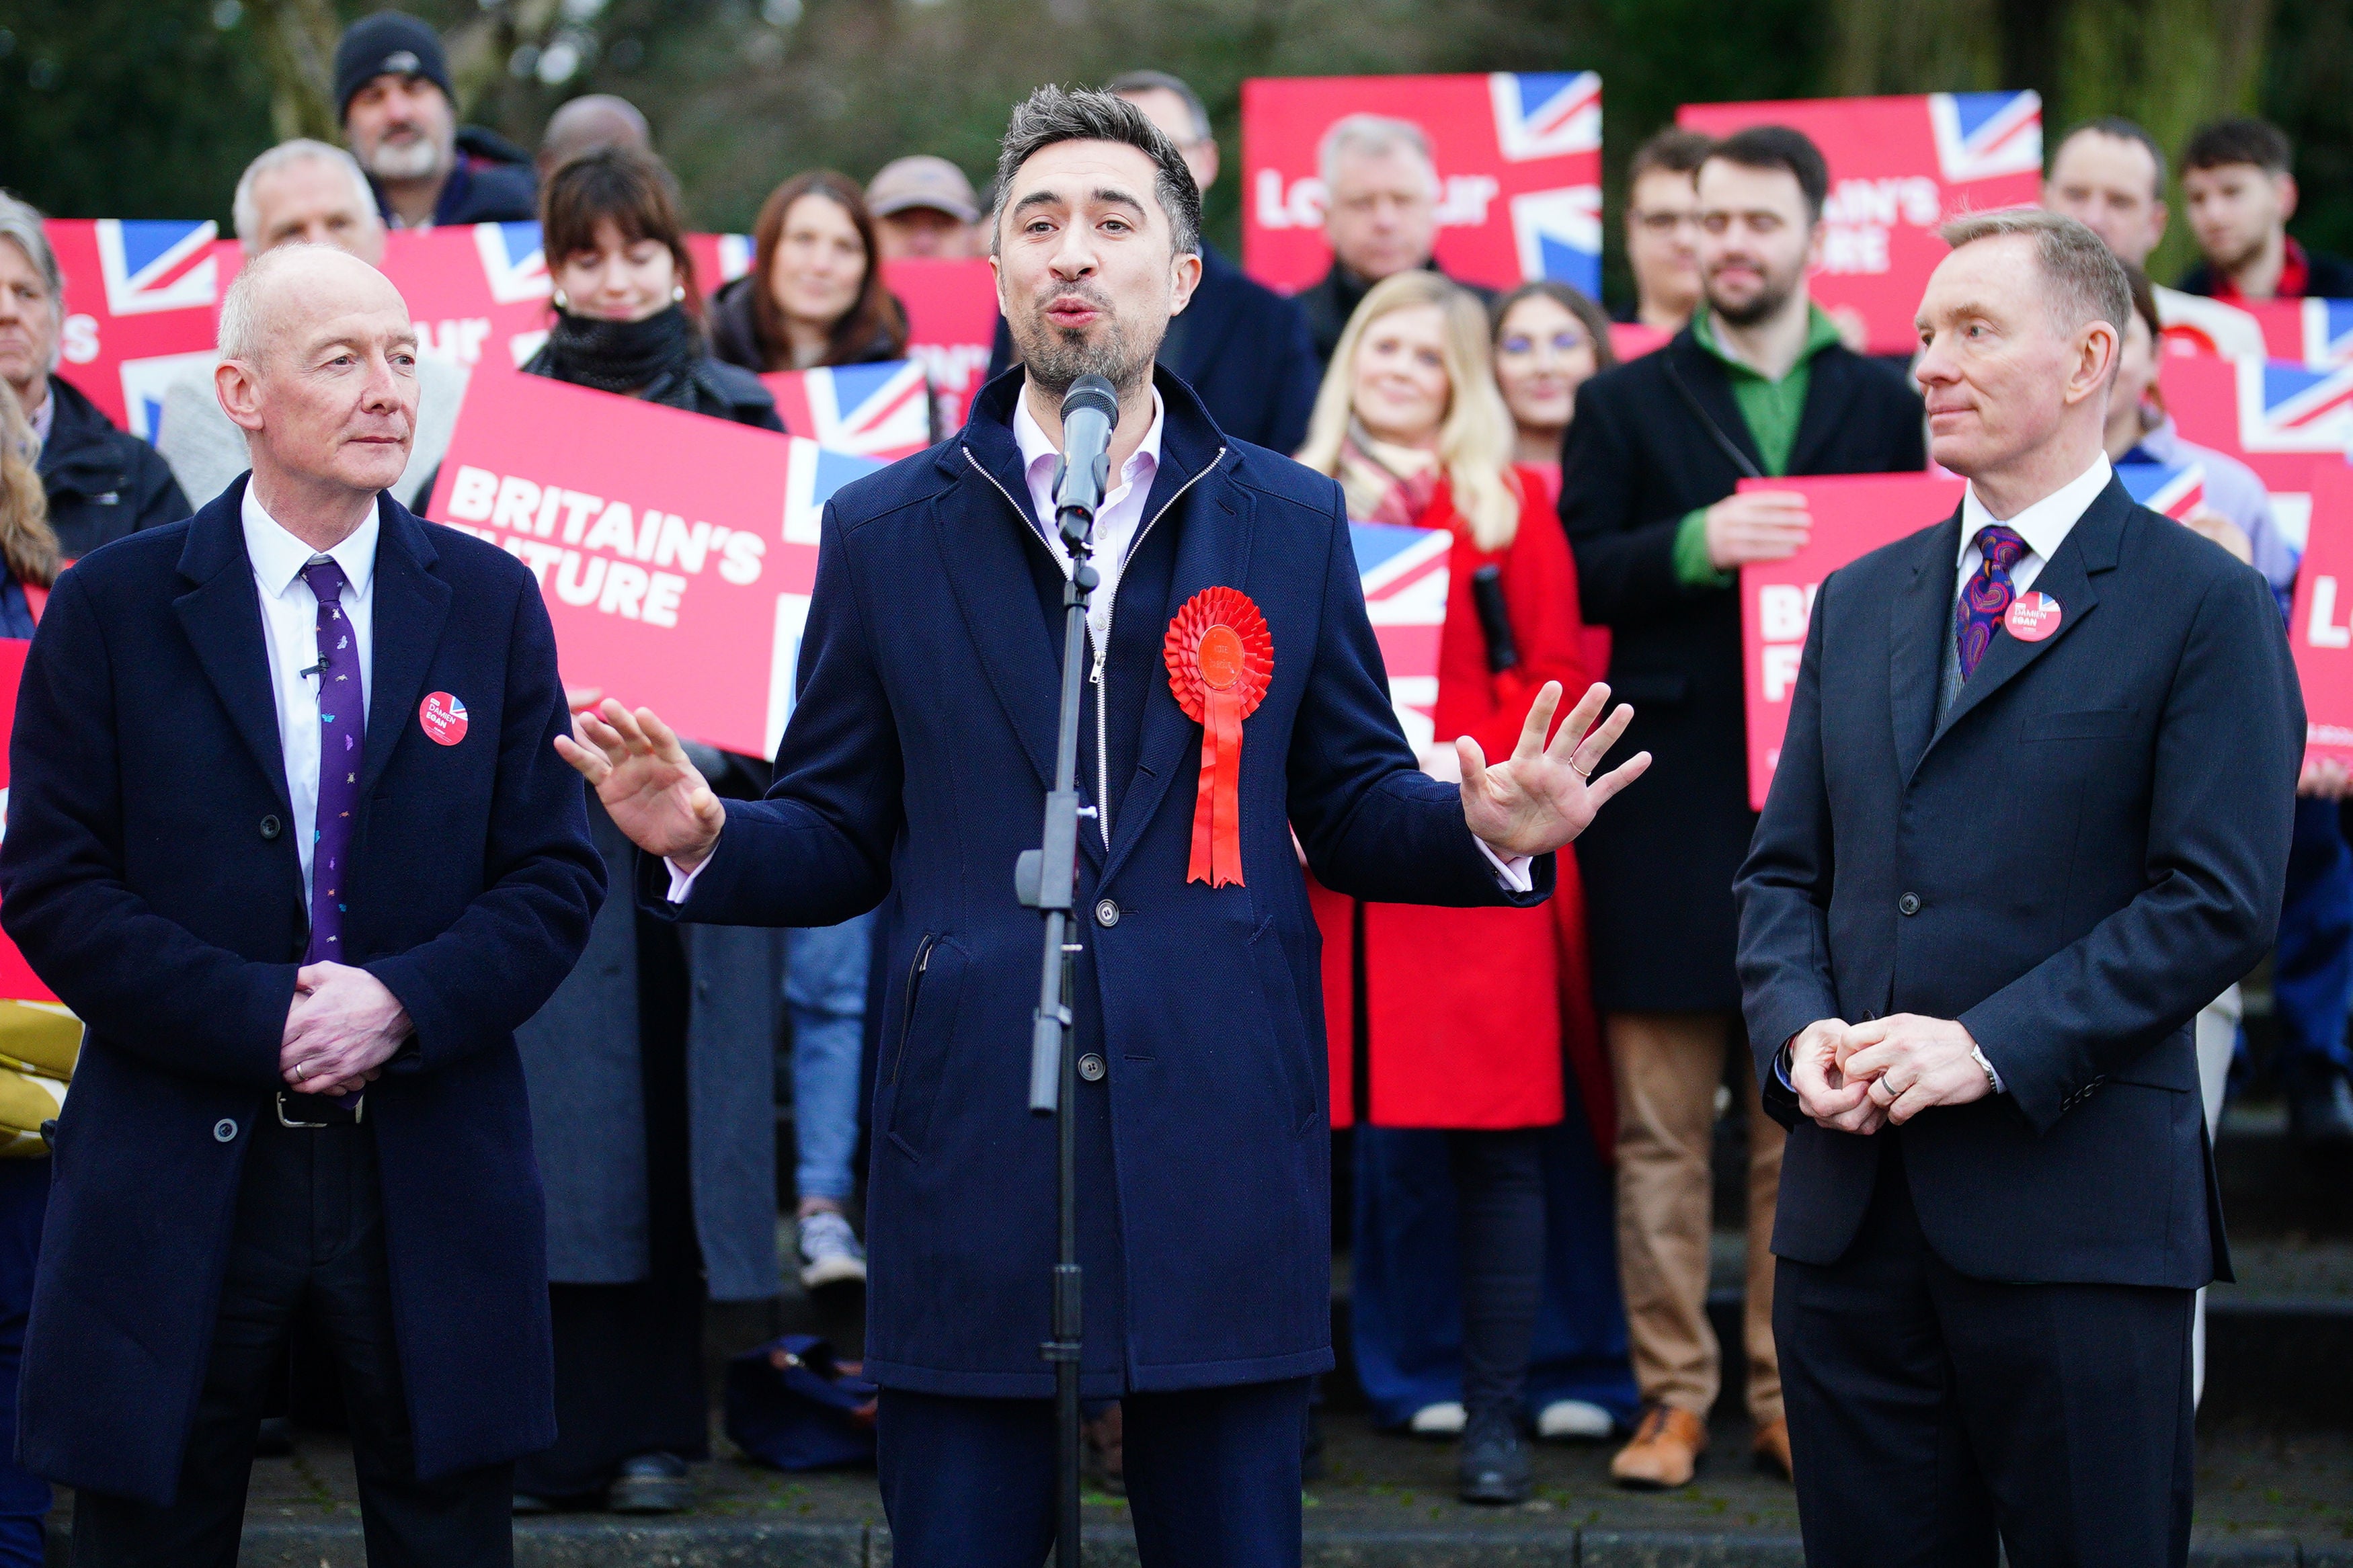 Mr Bryant (right) at the Kingswood by-election in February when he received his diagnosis